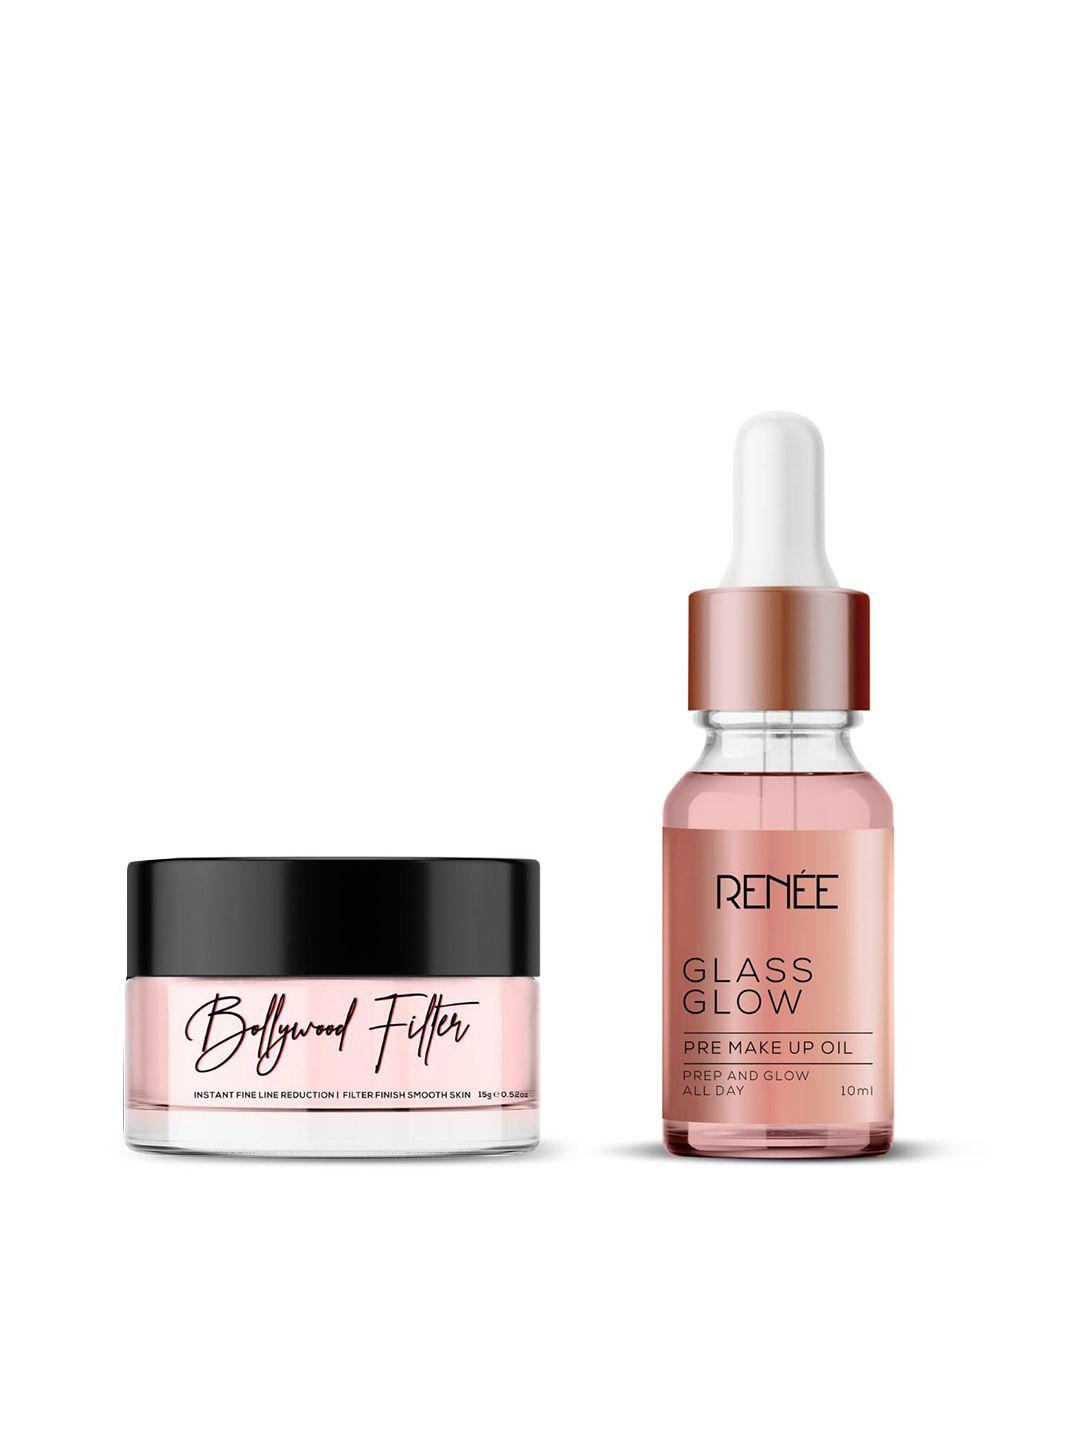 renee-set-of-bollywood-filter-15g-&-glass-glow-pre-makeup-oil-10ml